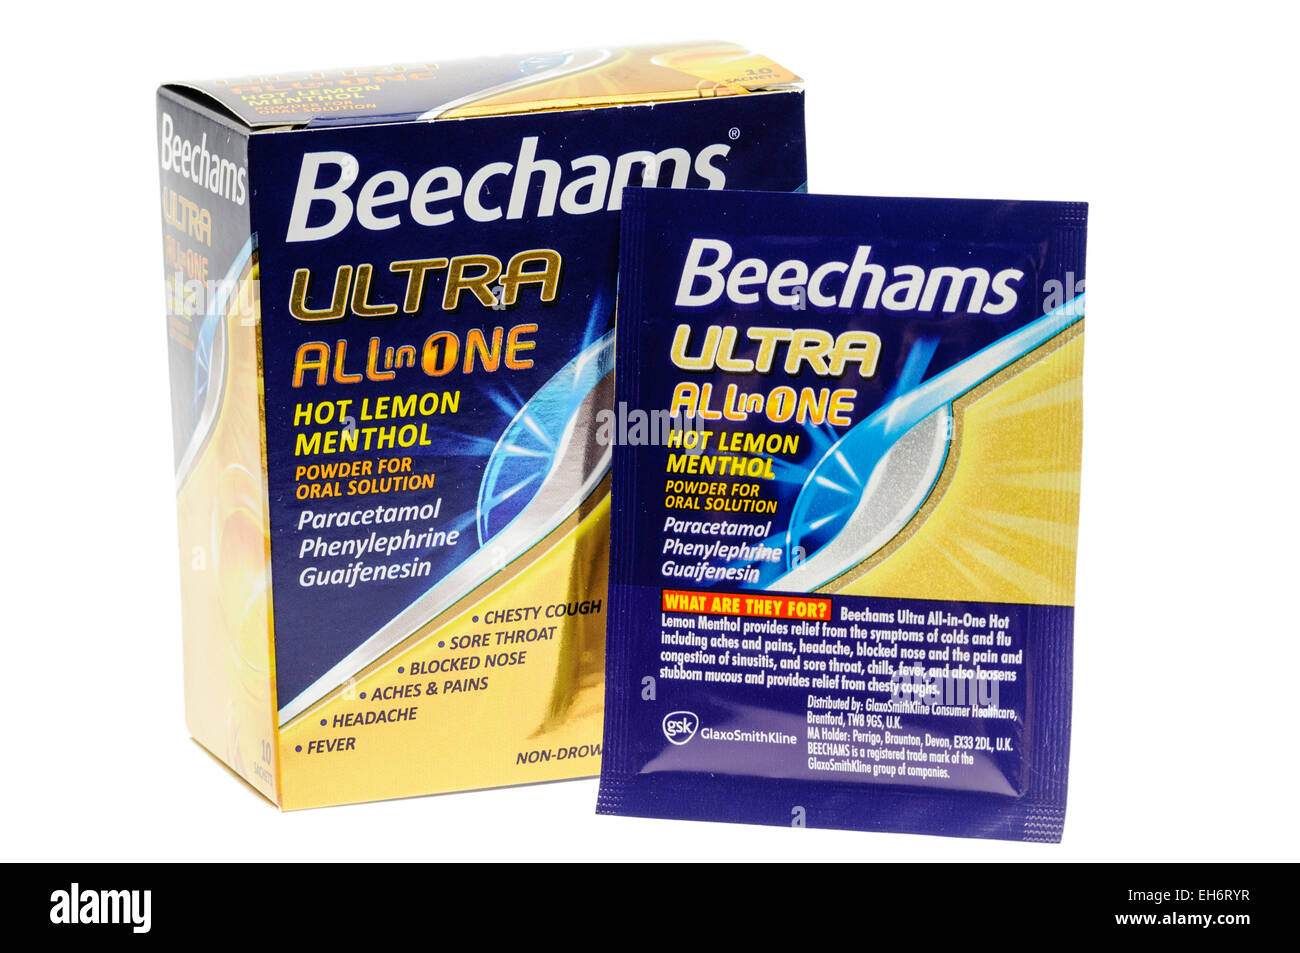 Beechams 'Ultra' Powders for cold and flu relief, containing paracetamol, phenylephrine and guaifenesin Stock Photo